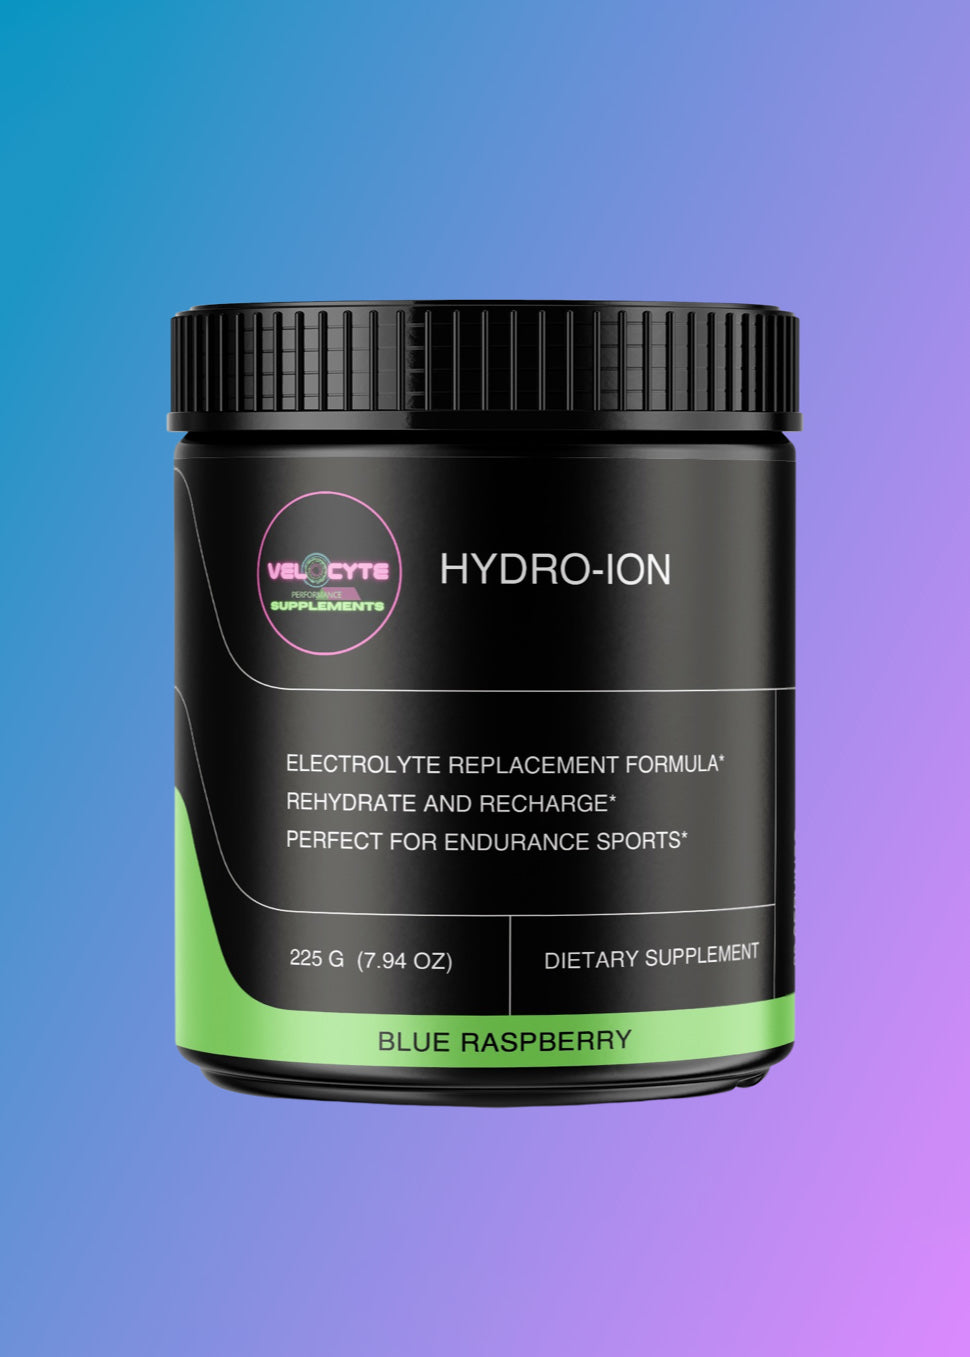 Hydro-ION Electrolyte Replacement